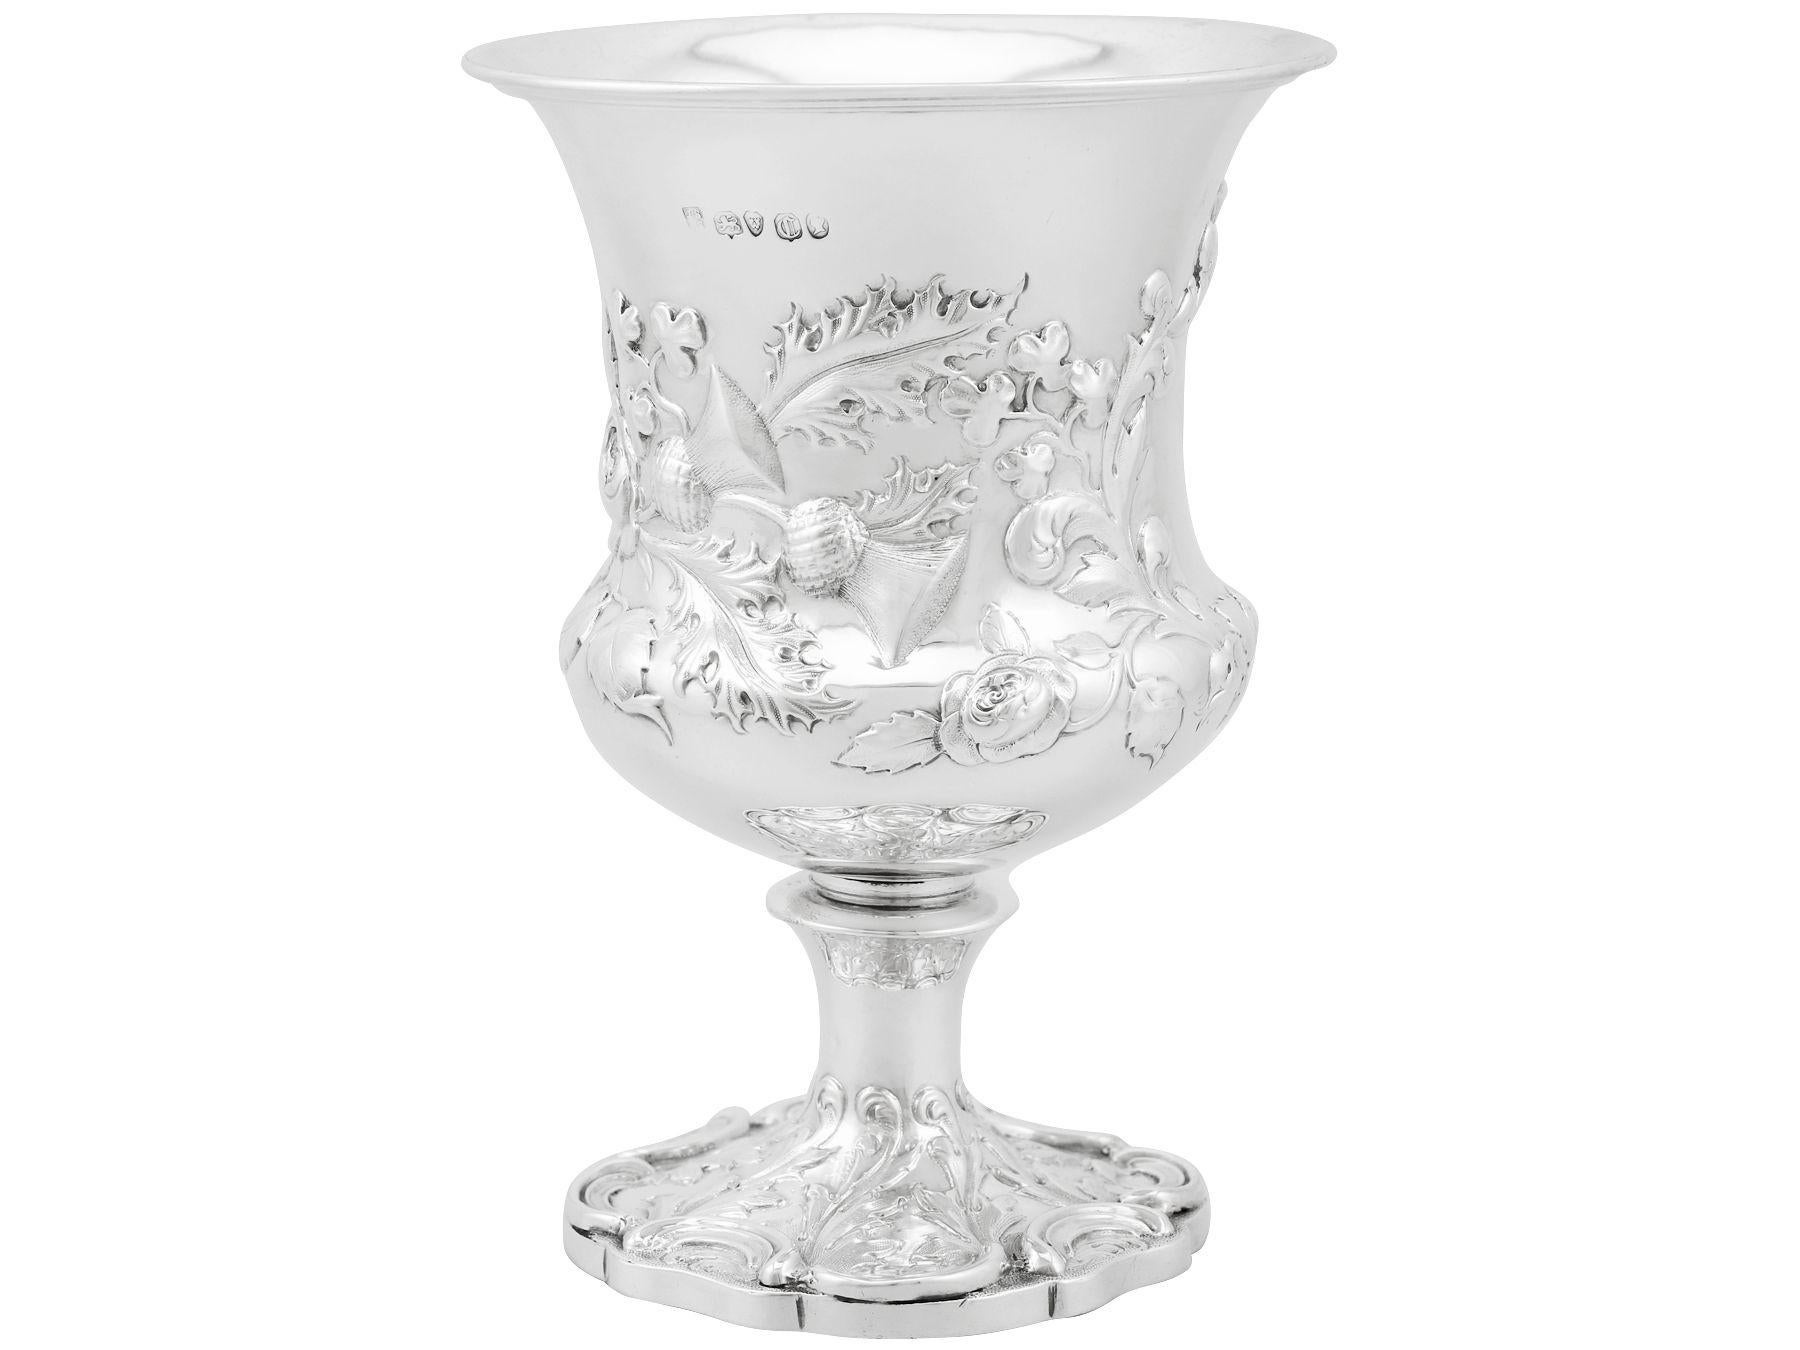 An exceptional, fine and impressive antique Victorian English sterling silver goblet; an addition to our collection of wine and drinks related silverware.

This exceptional antique Victorian sterling silver goblet has a circular Campania shaped